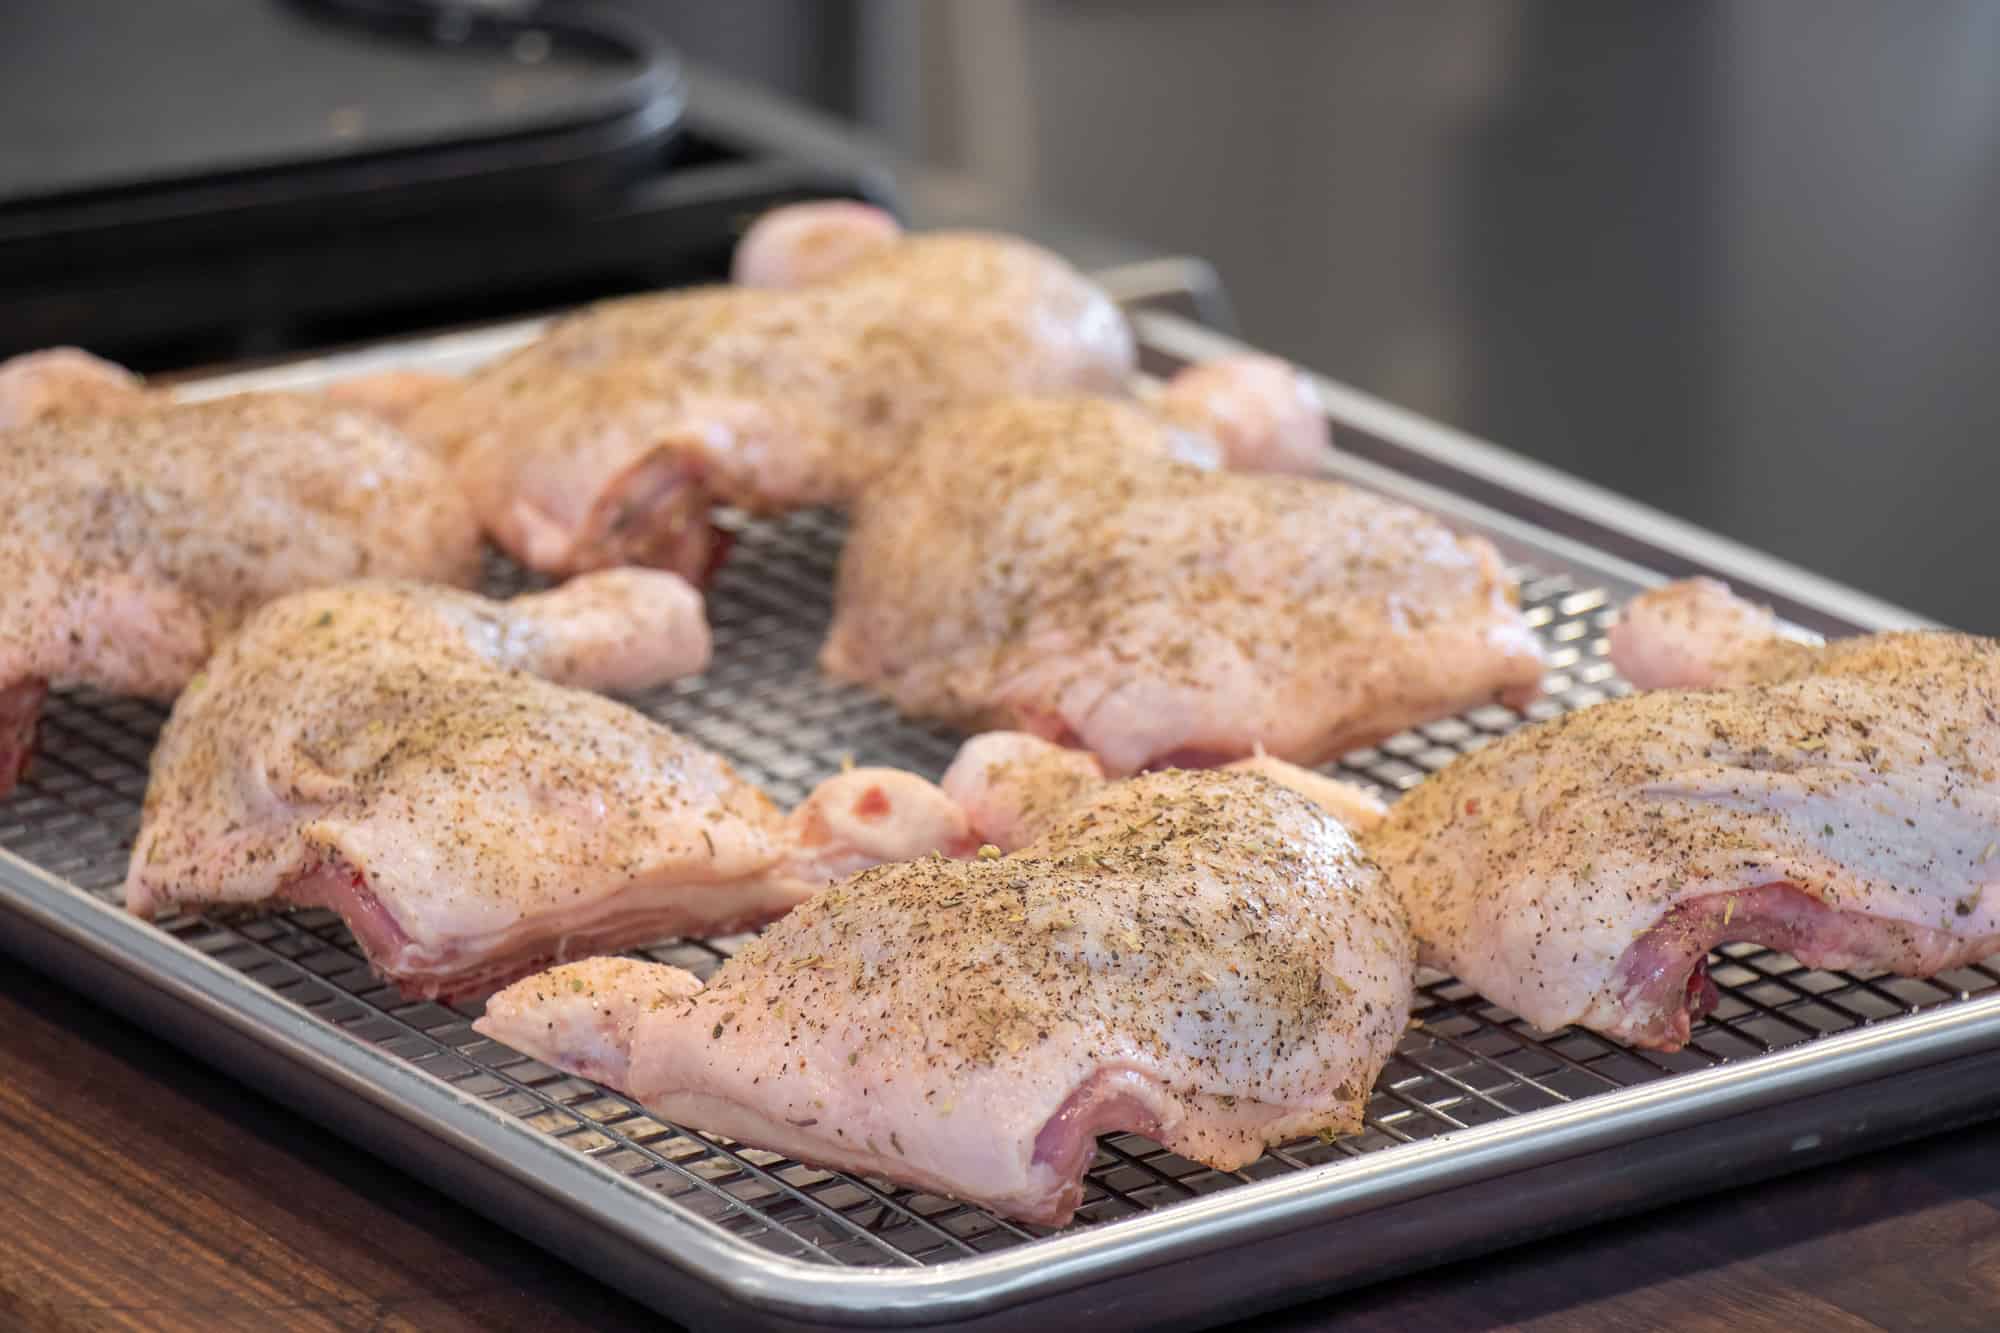 Bake the chicken legs for 75 minutes.